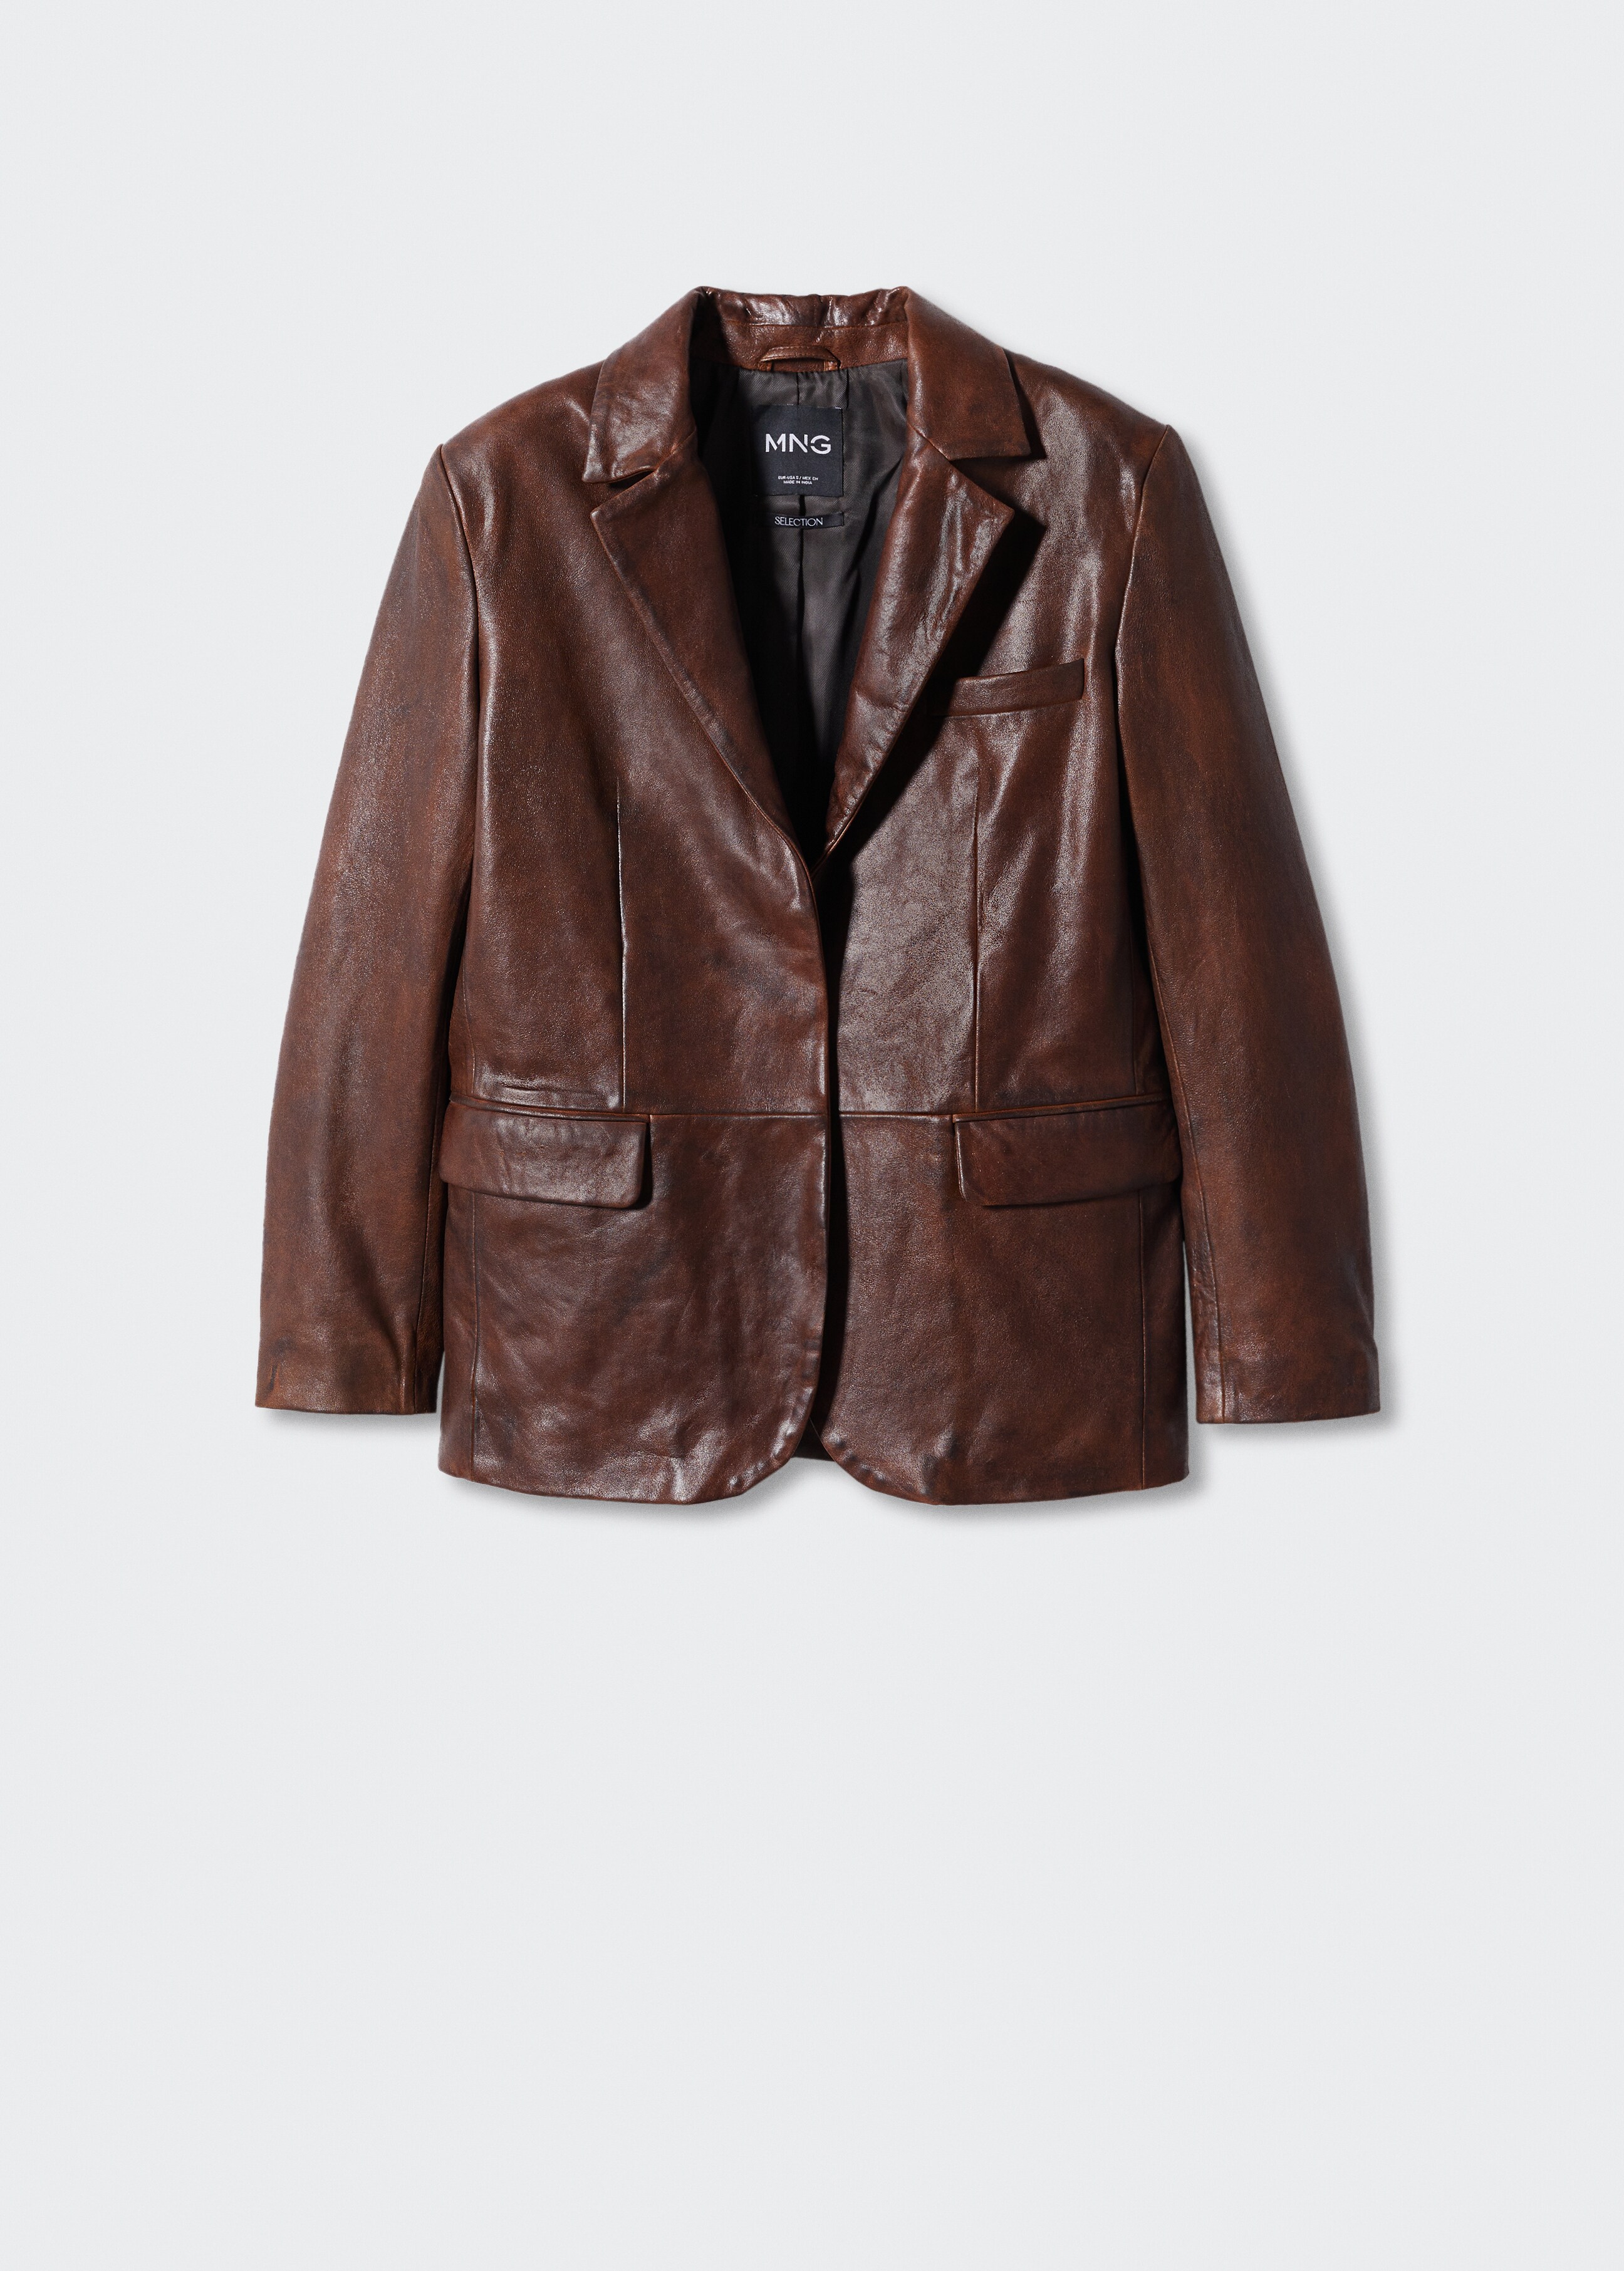 Worn-effect leather jacket - Article without model